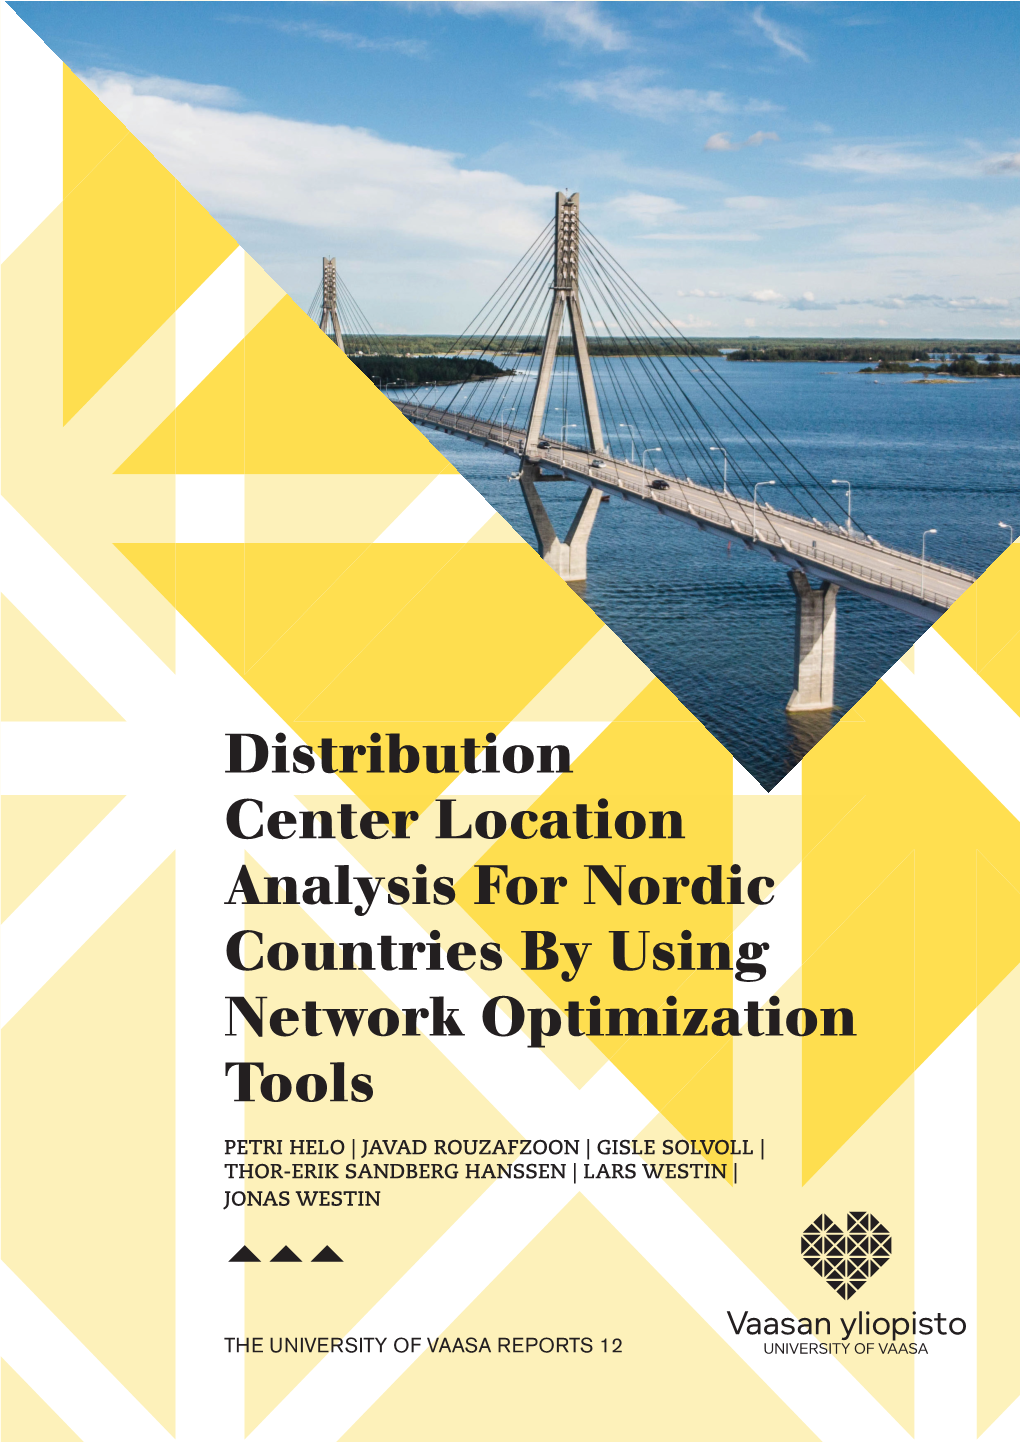 Distribution Center Location Analysis for Nordic Countries by Using Network Optimization Tools